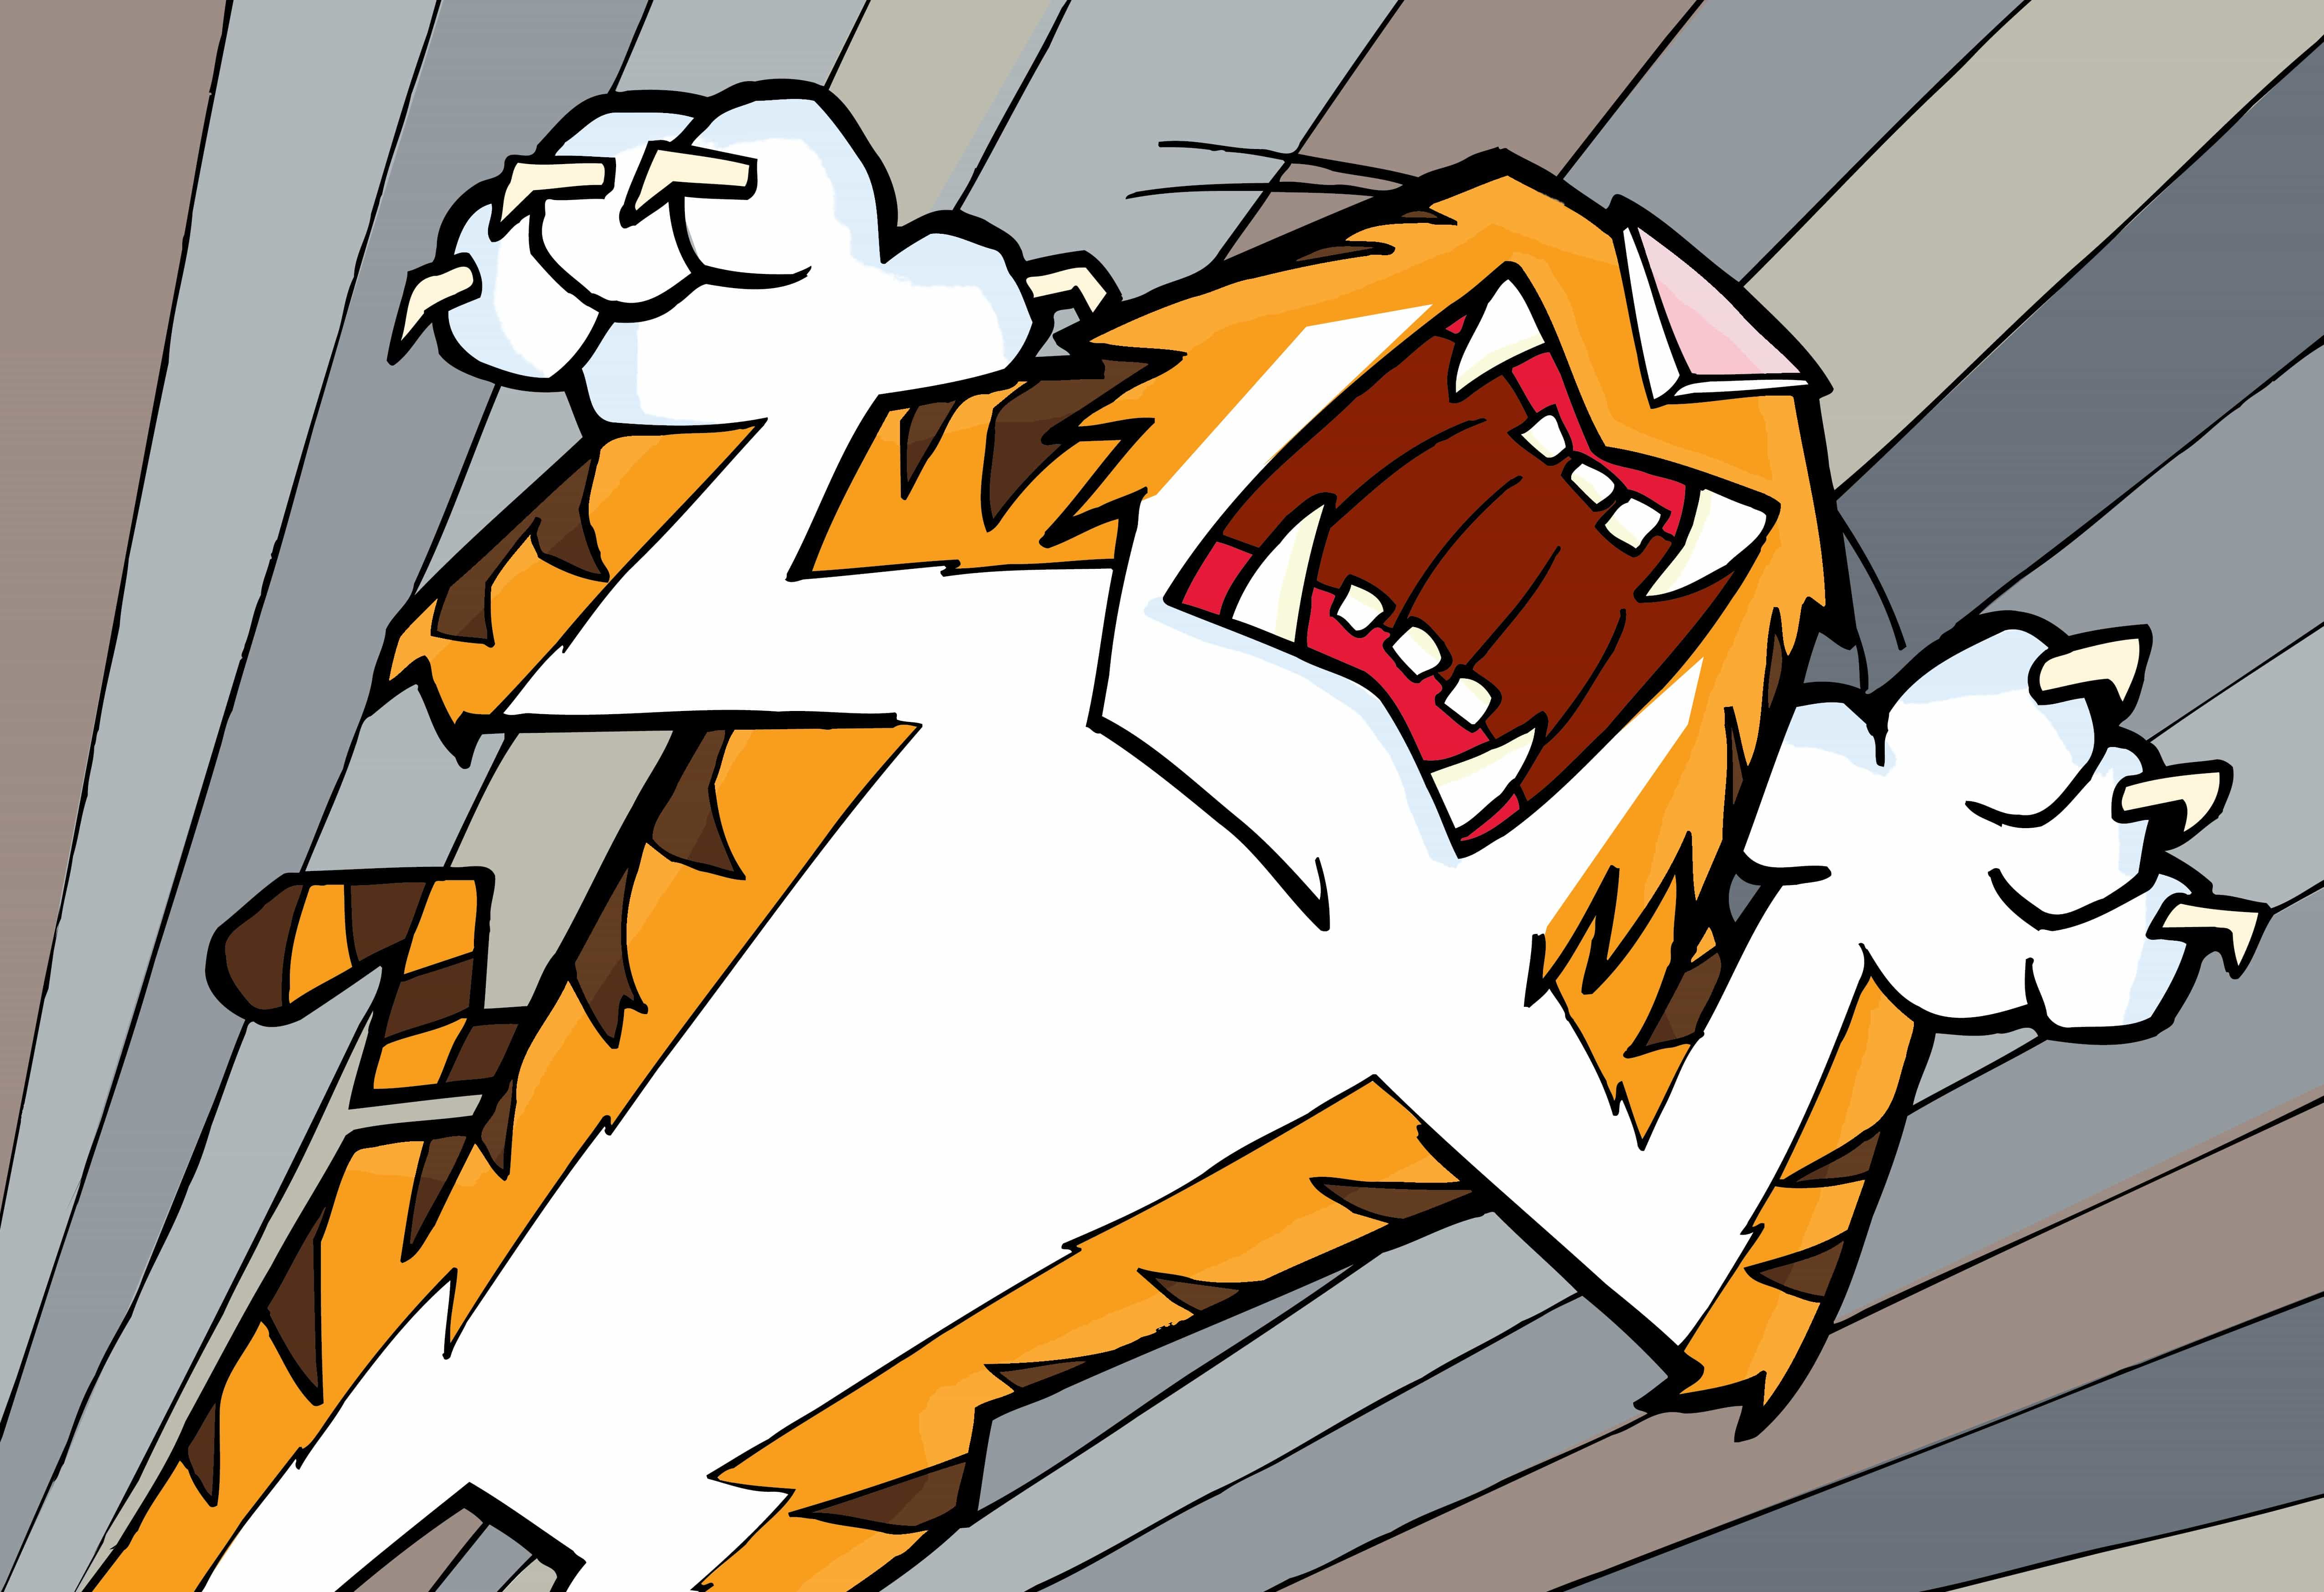 A drawing of a tiger attacking